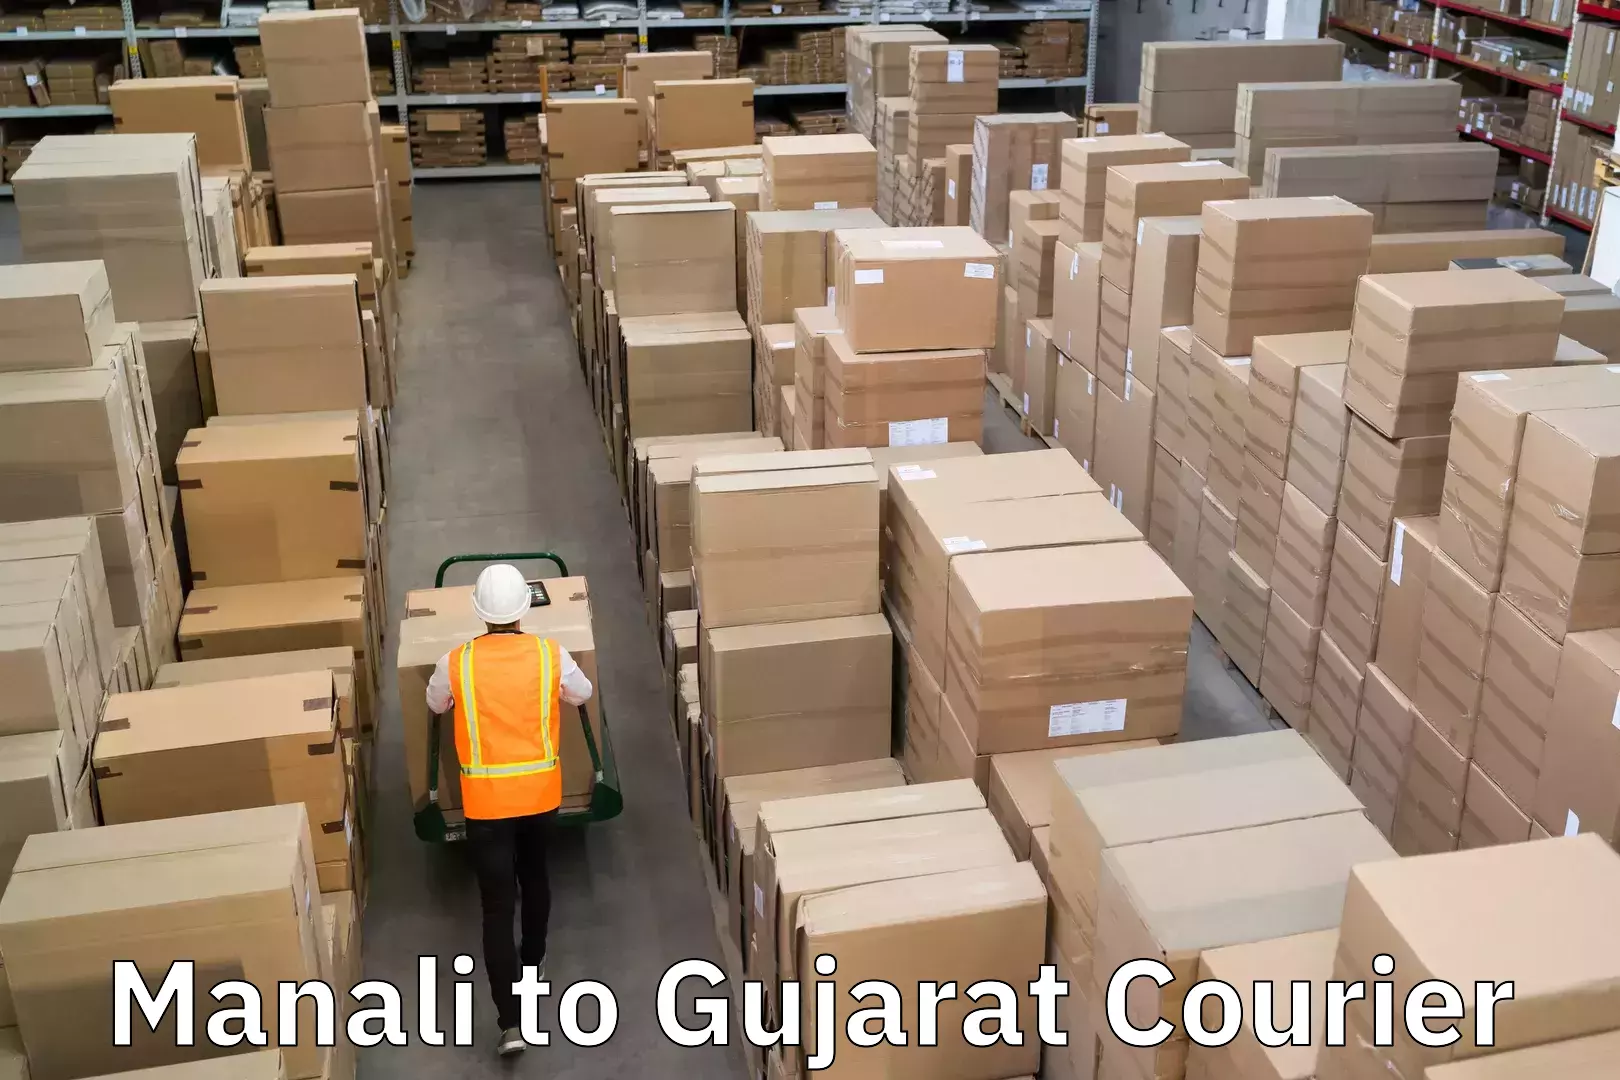 24/7 courier service Manali to Gujarat